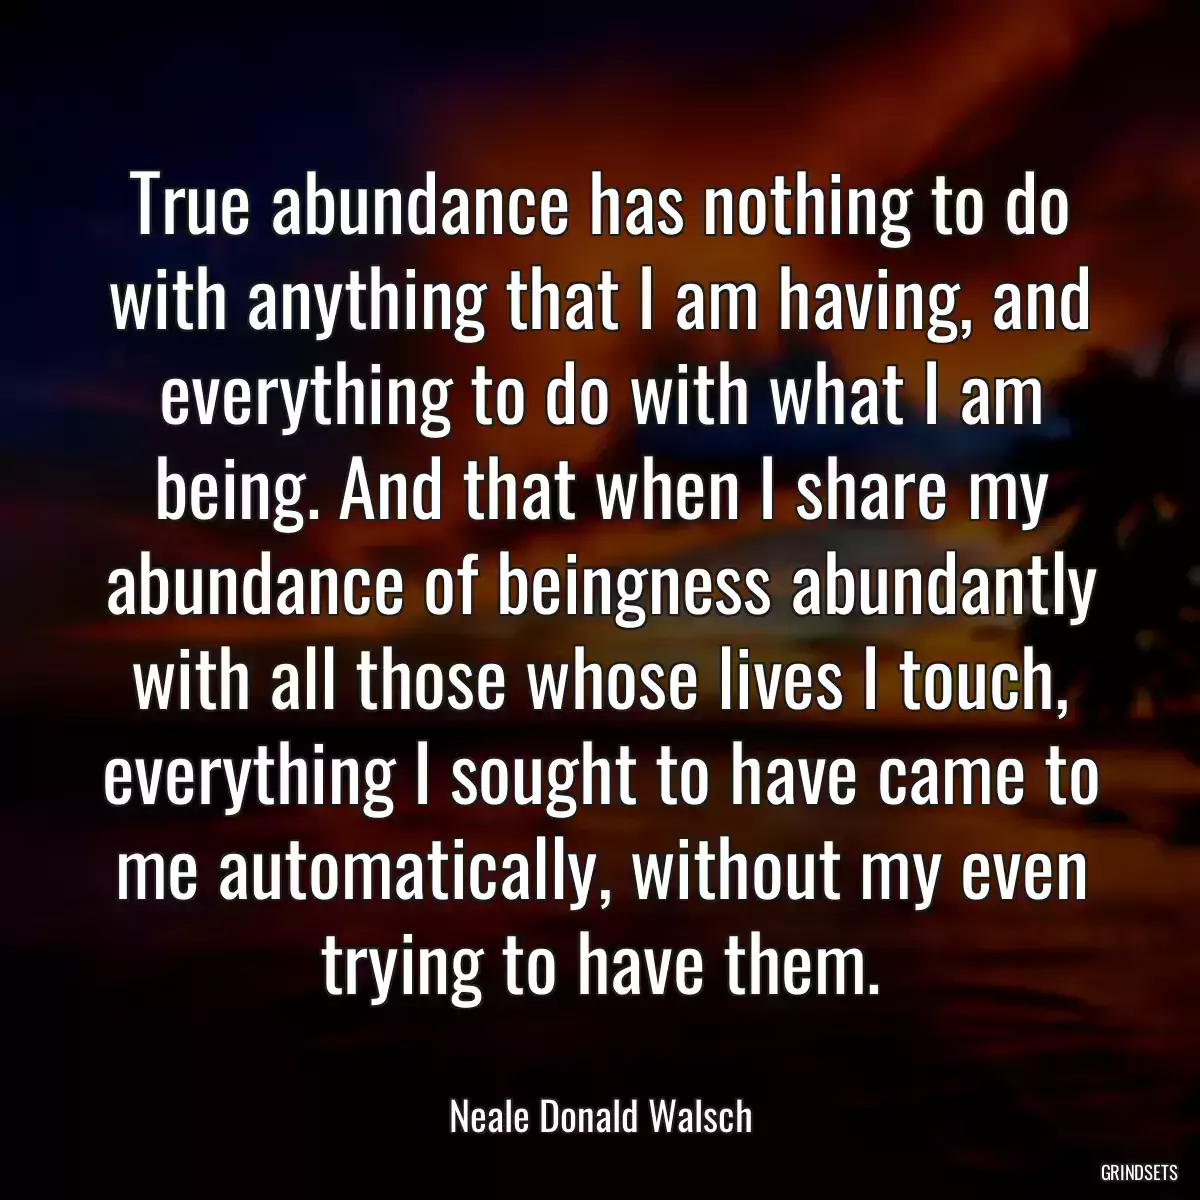 True abundance has nothing to do with anything that I am having, and everything to do with what I am being. And that when I share my abundance of beingness abundantly with all those whose lives I touch, everything I sought to have came to me automatically, without my even trying to have them.